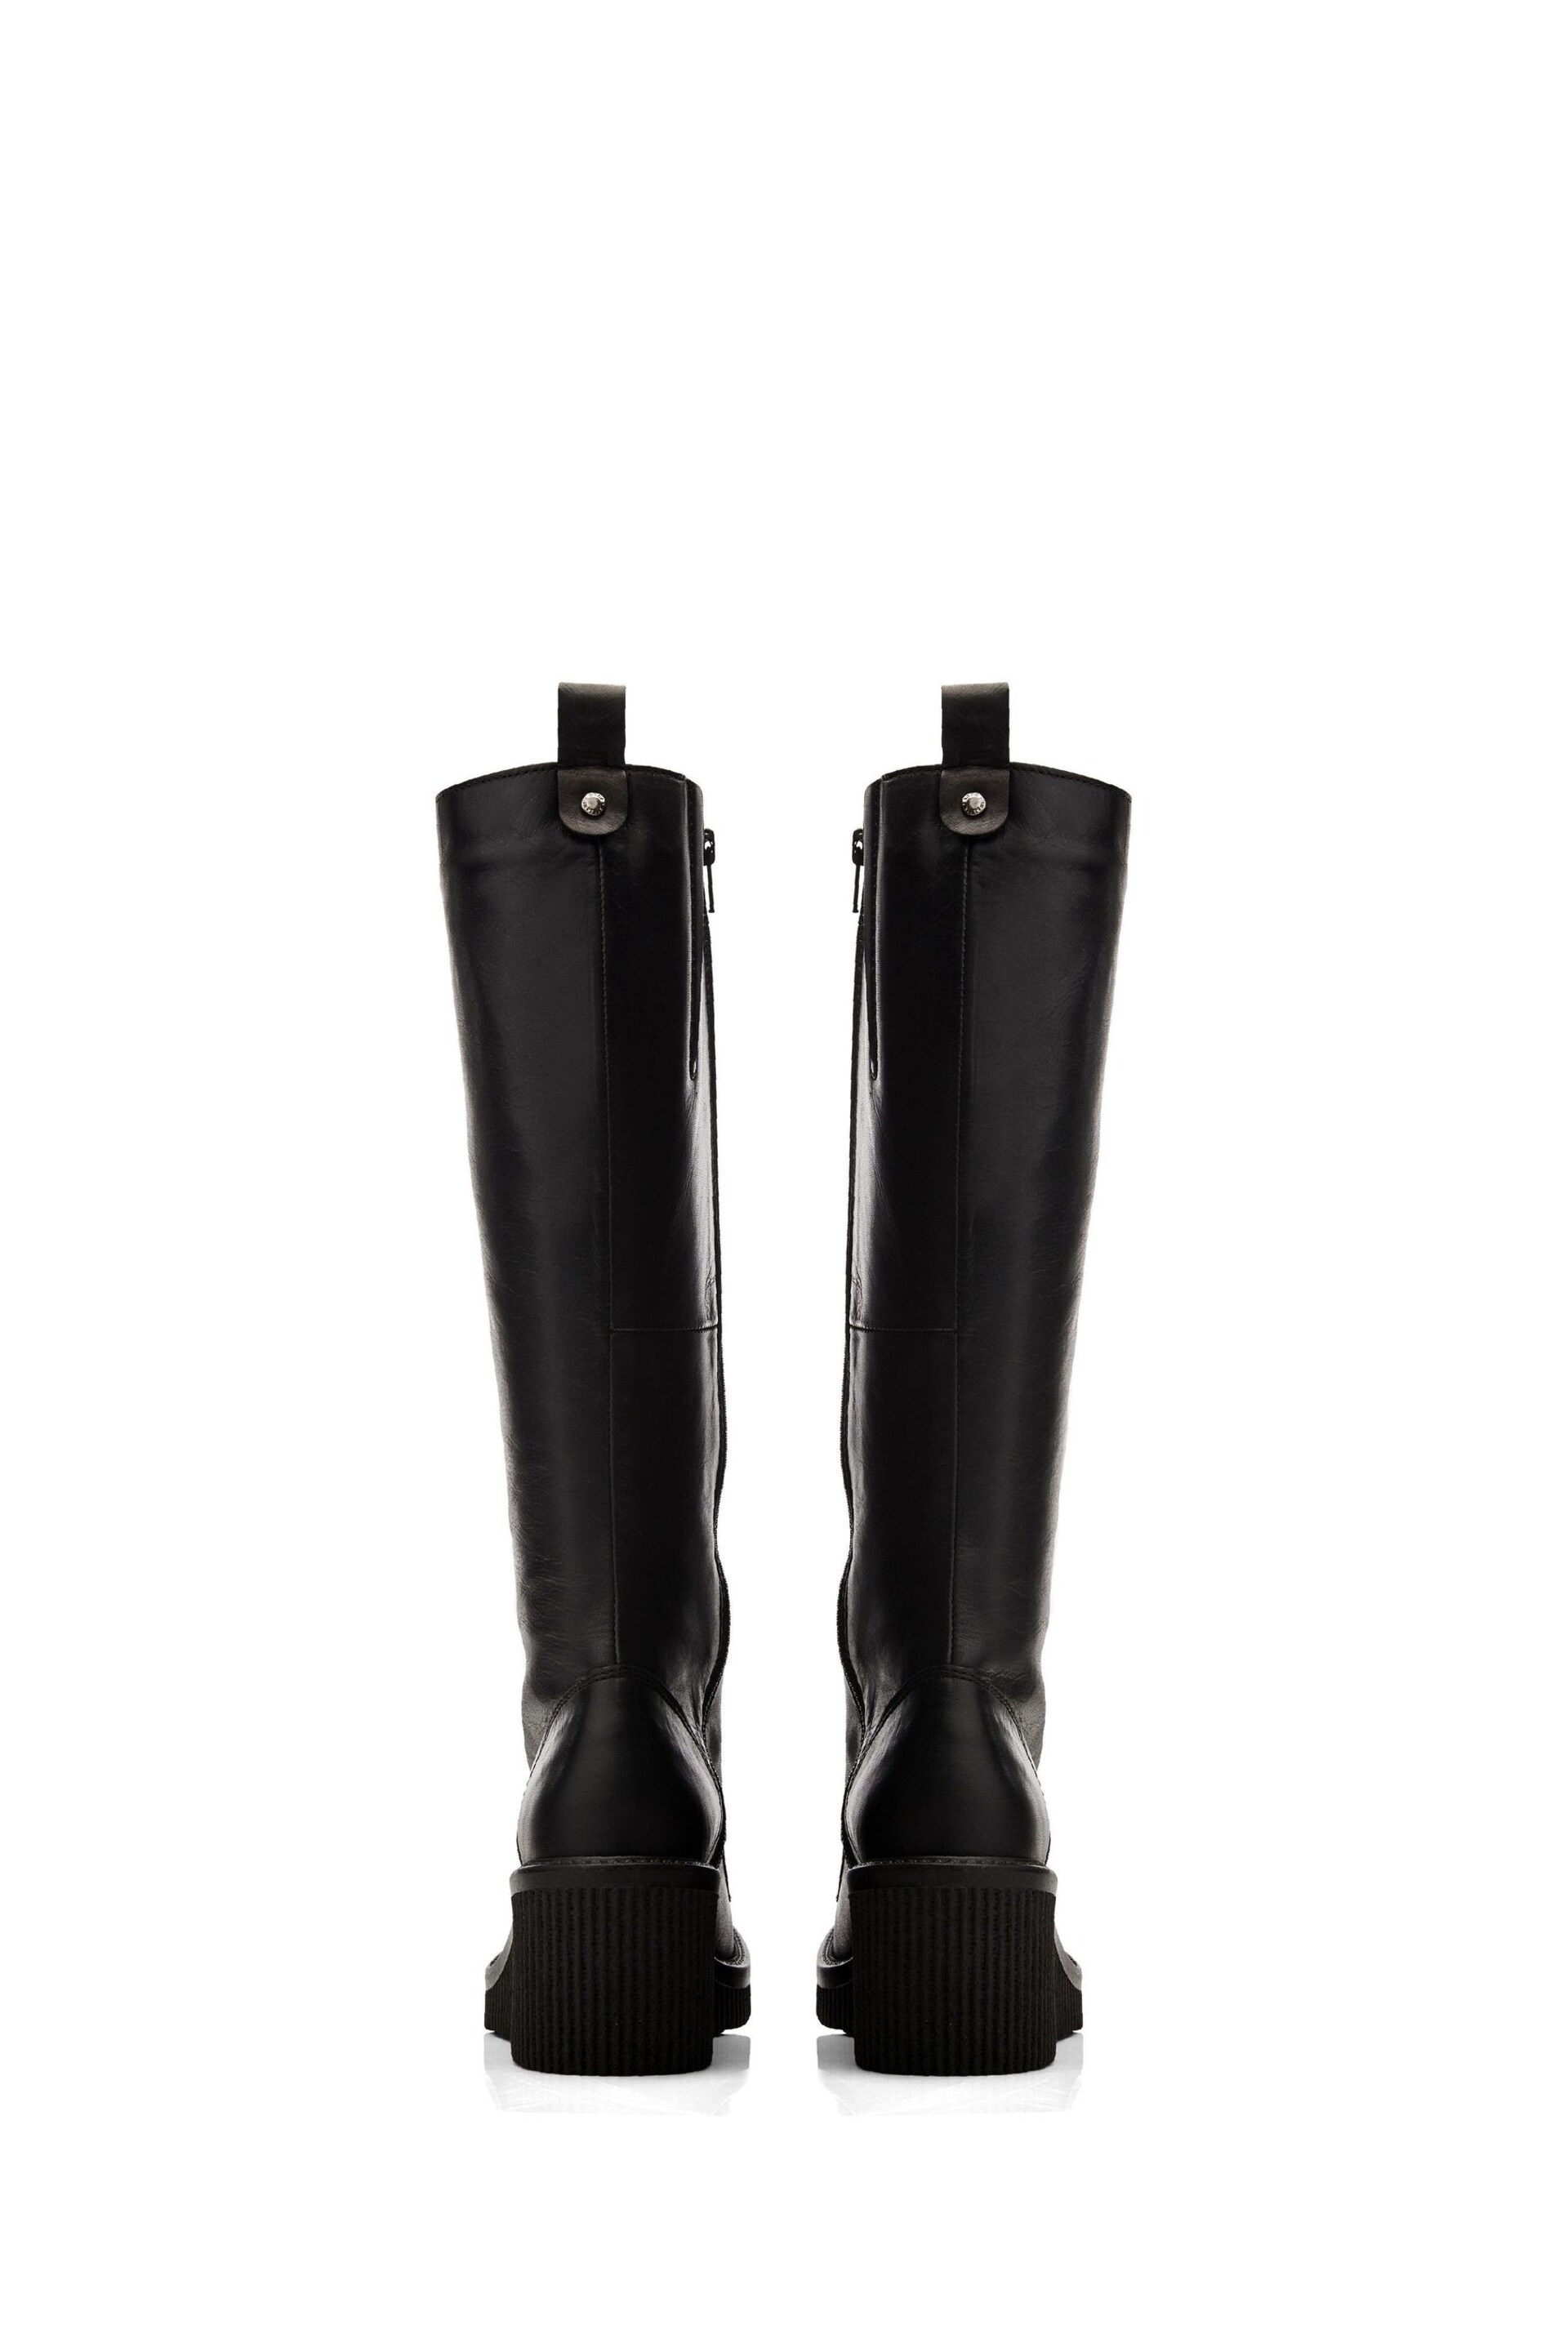 Moda in Pelle Halliyah Long Lace up Bezzie Crepe Wedge Black Boots - Image 3 of 4